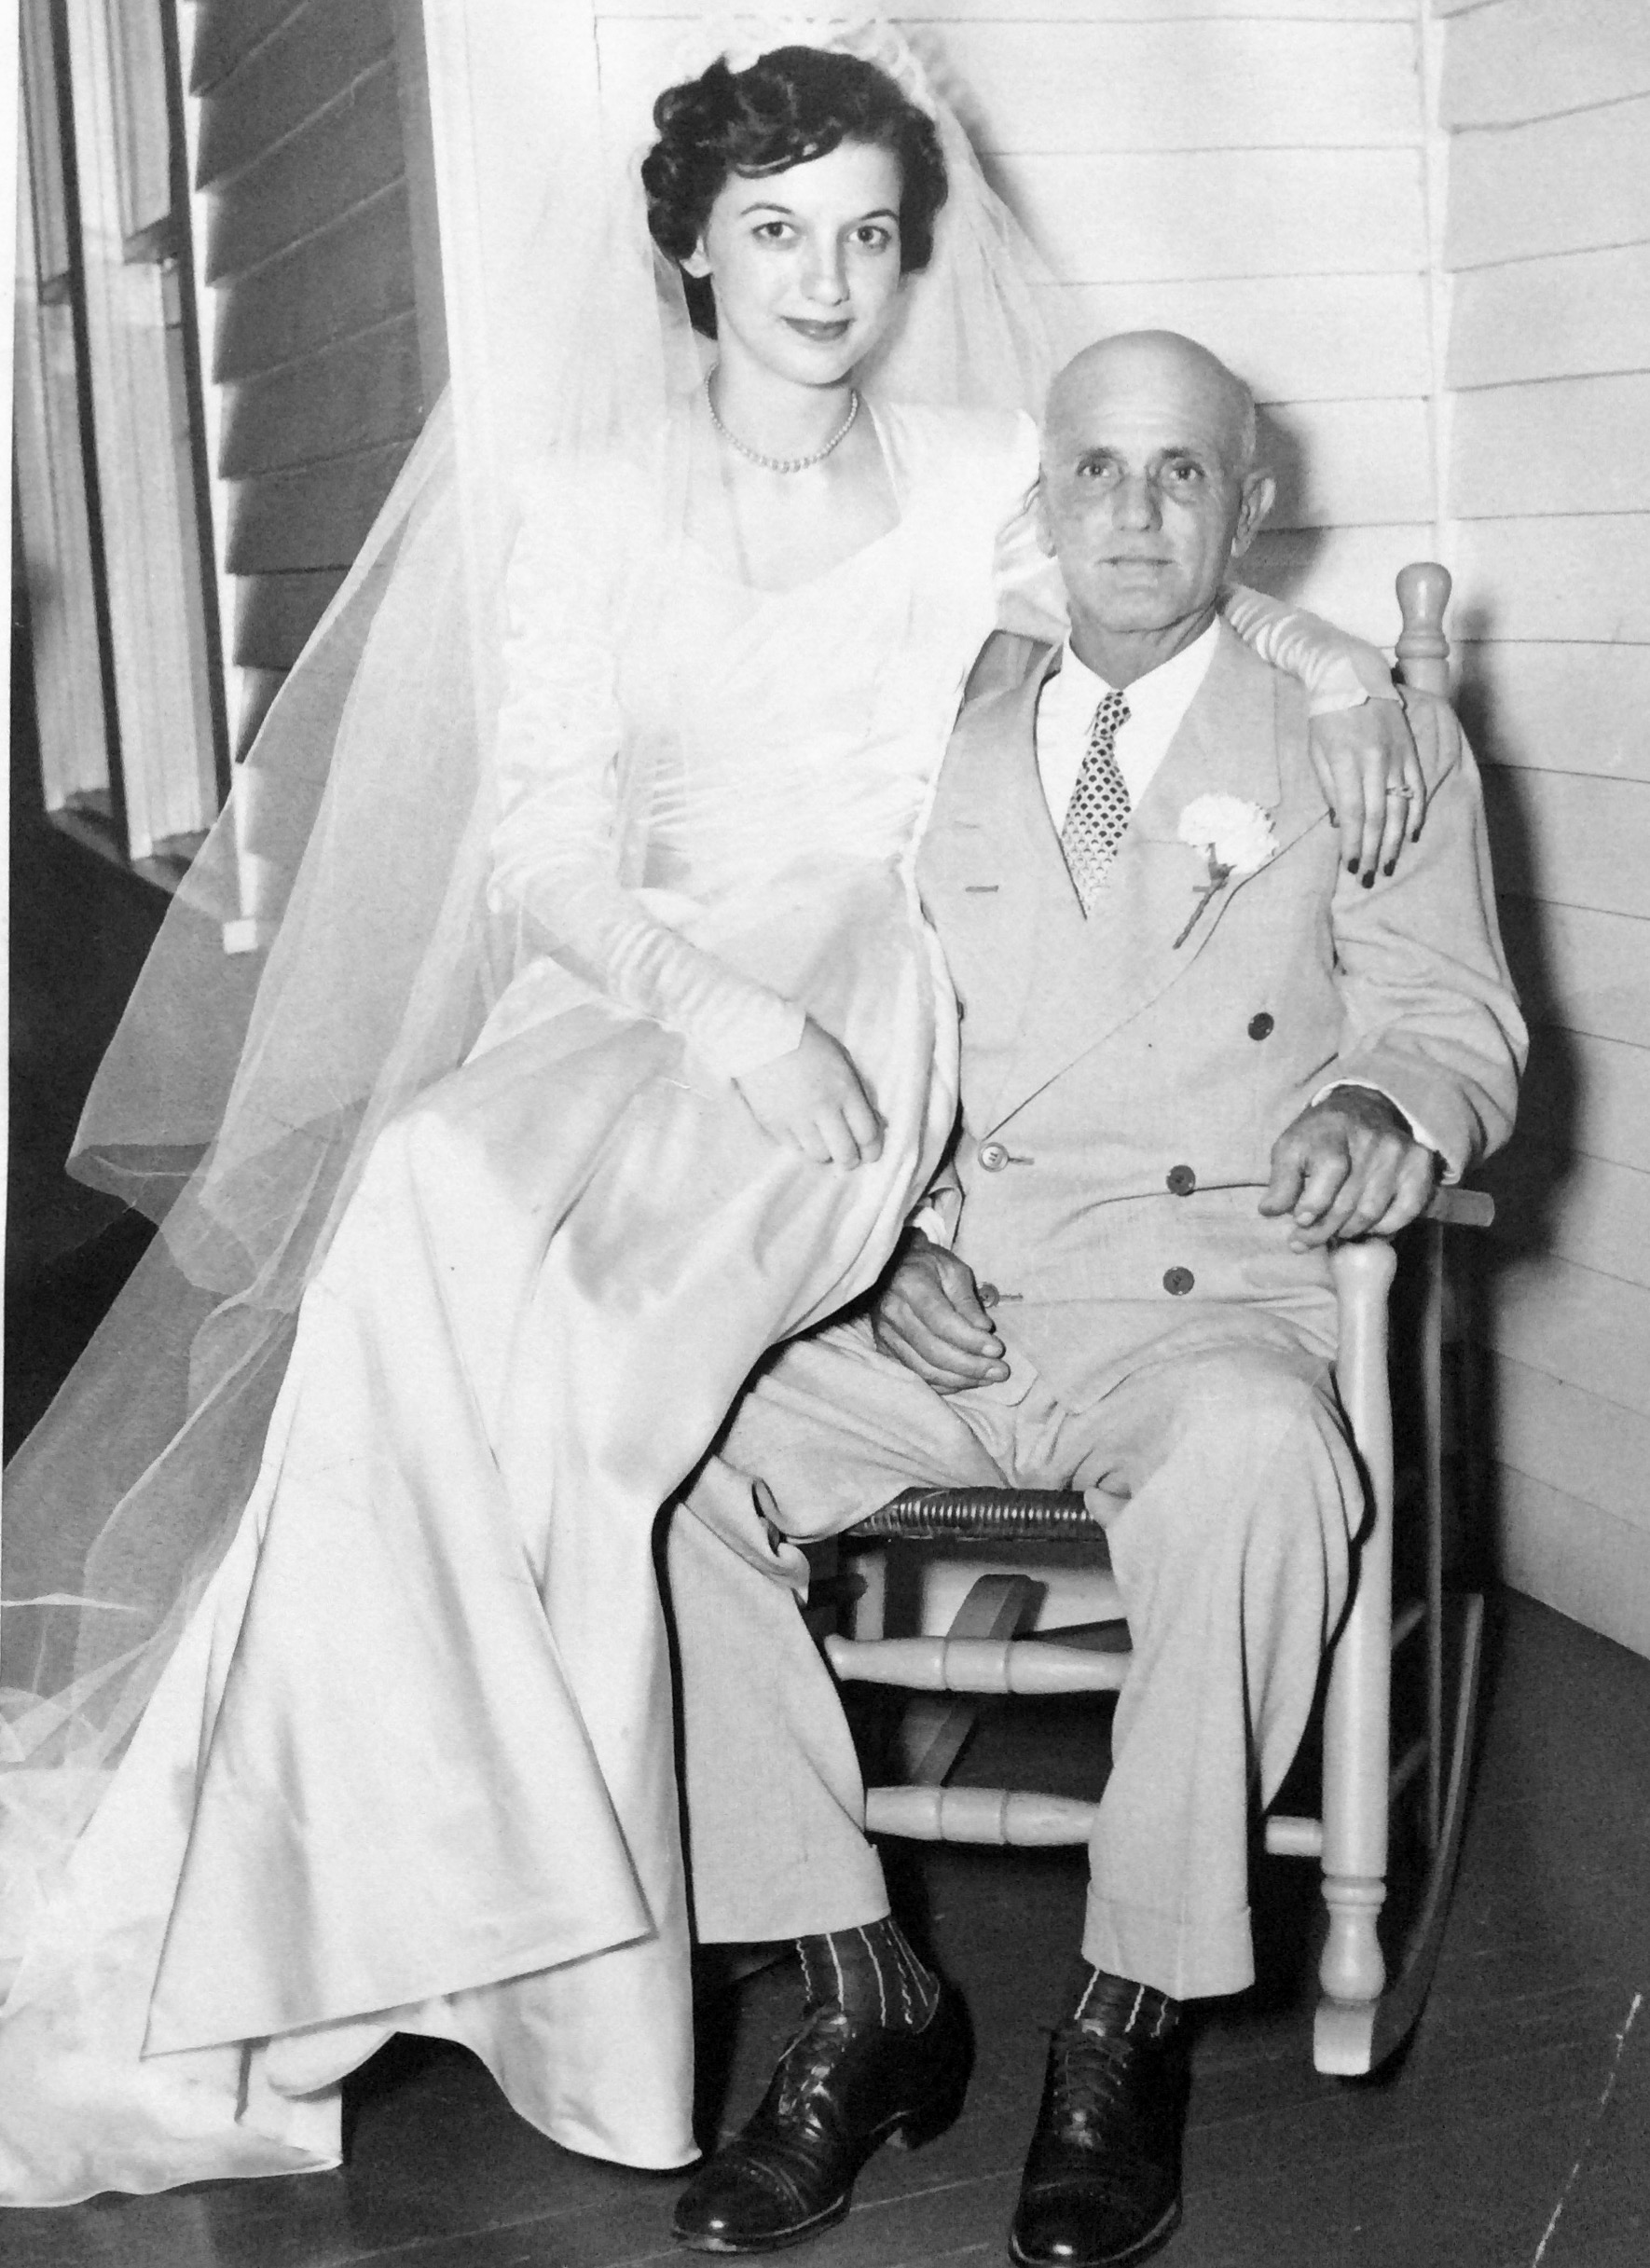 The bride is Jeannette Doster Hawkins, with her father, my uncle Jott Doster.  While she and Reggie were on their honeymoon Uncle Jott had a stroke and died several days later.  She was a 1949 graduate of Winder High Schoool ( the last year of 11th grade graduation, the next year Ga. added a 12th grade requirement) and was attending a business college in Atlanta where she met Reg. Hawkins, a super nice guy who won her heart.